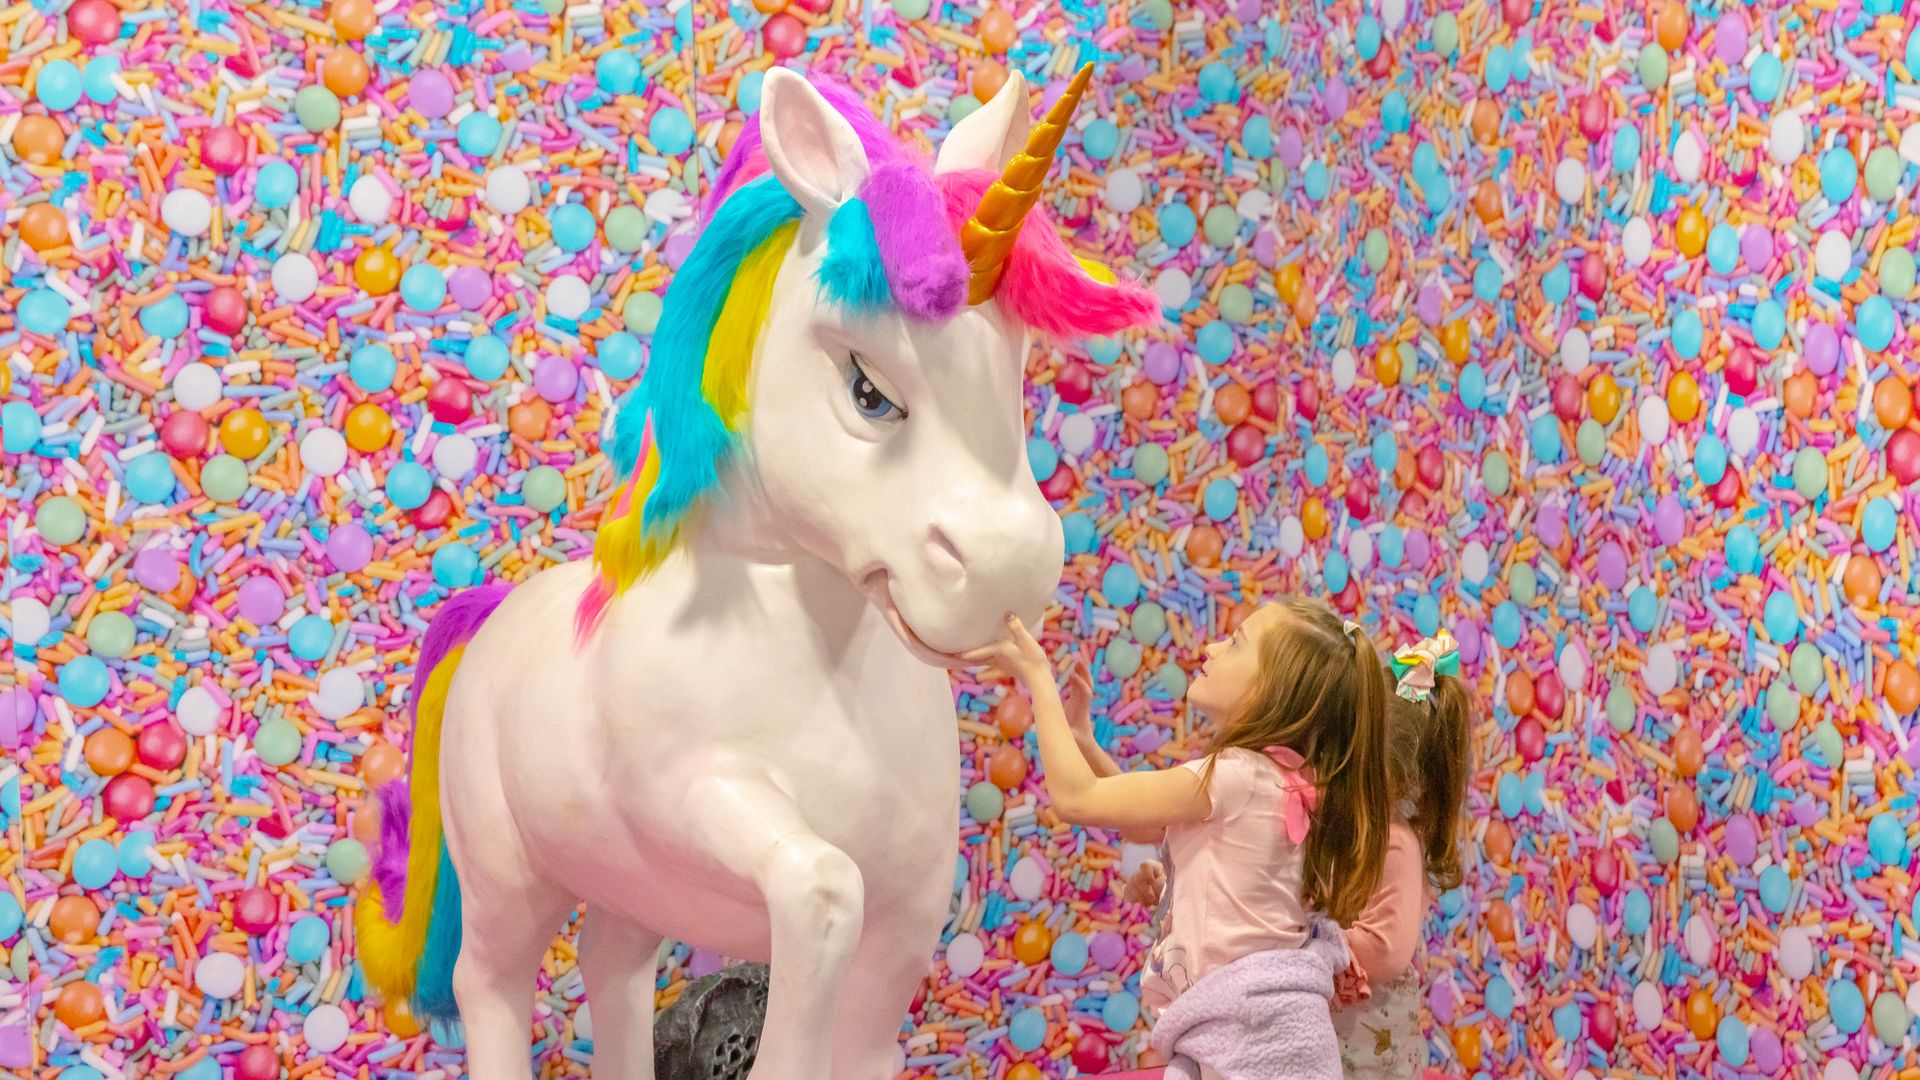 A small girl reaches up to pet a life-sized unicorn statue 